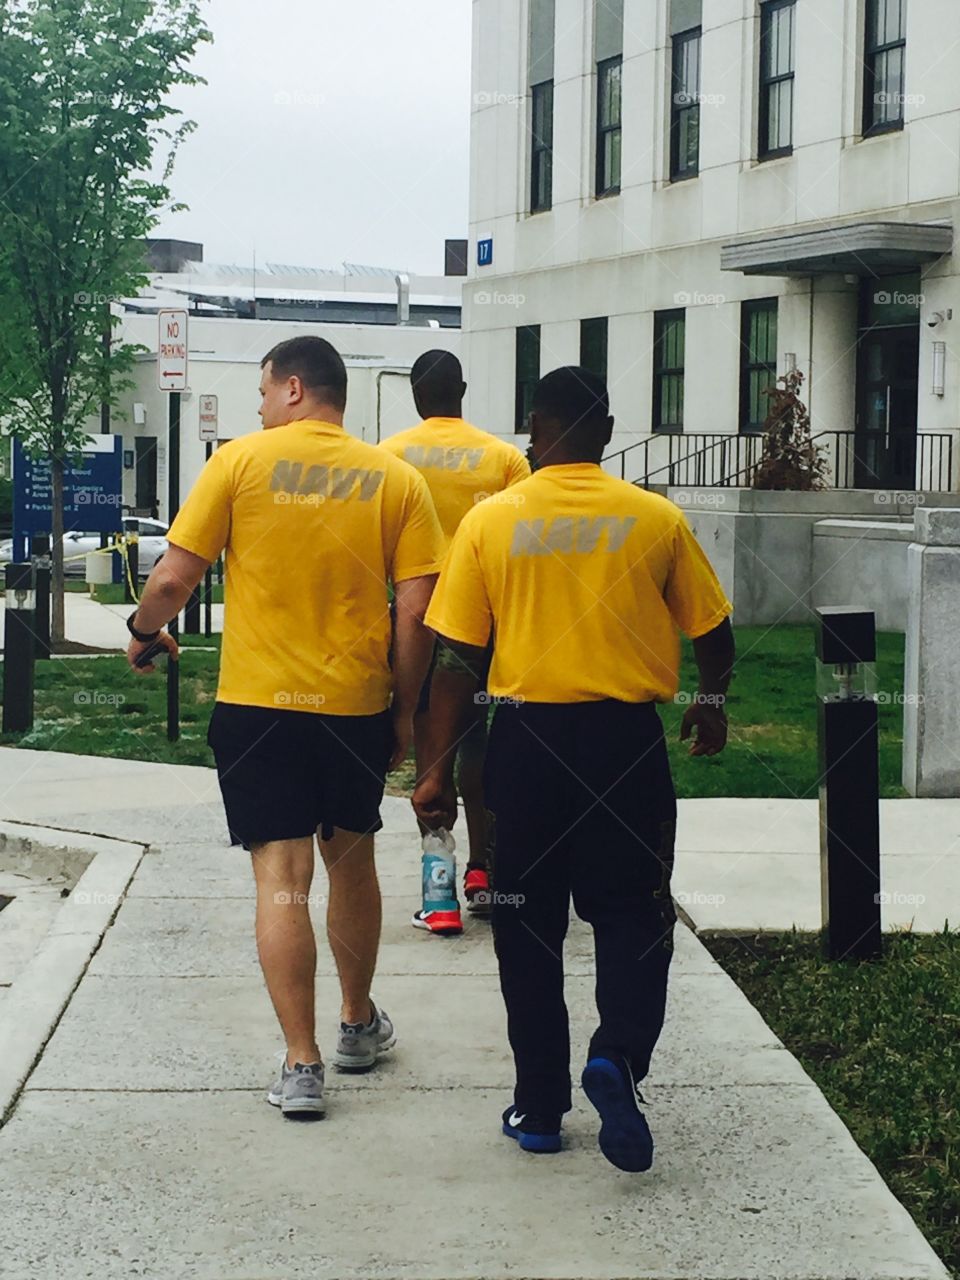 Navy Support Activity military Walter Reed
Men walking